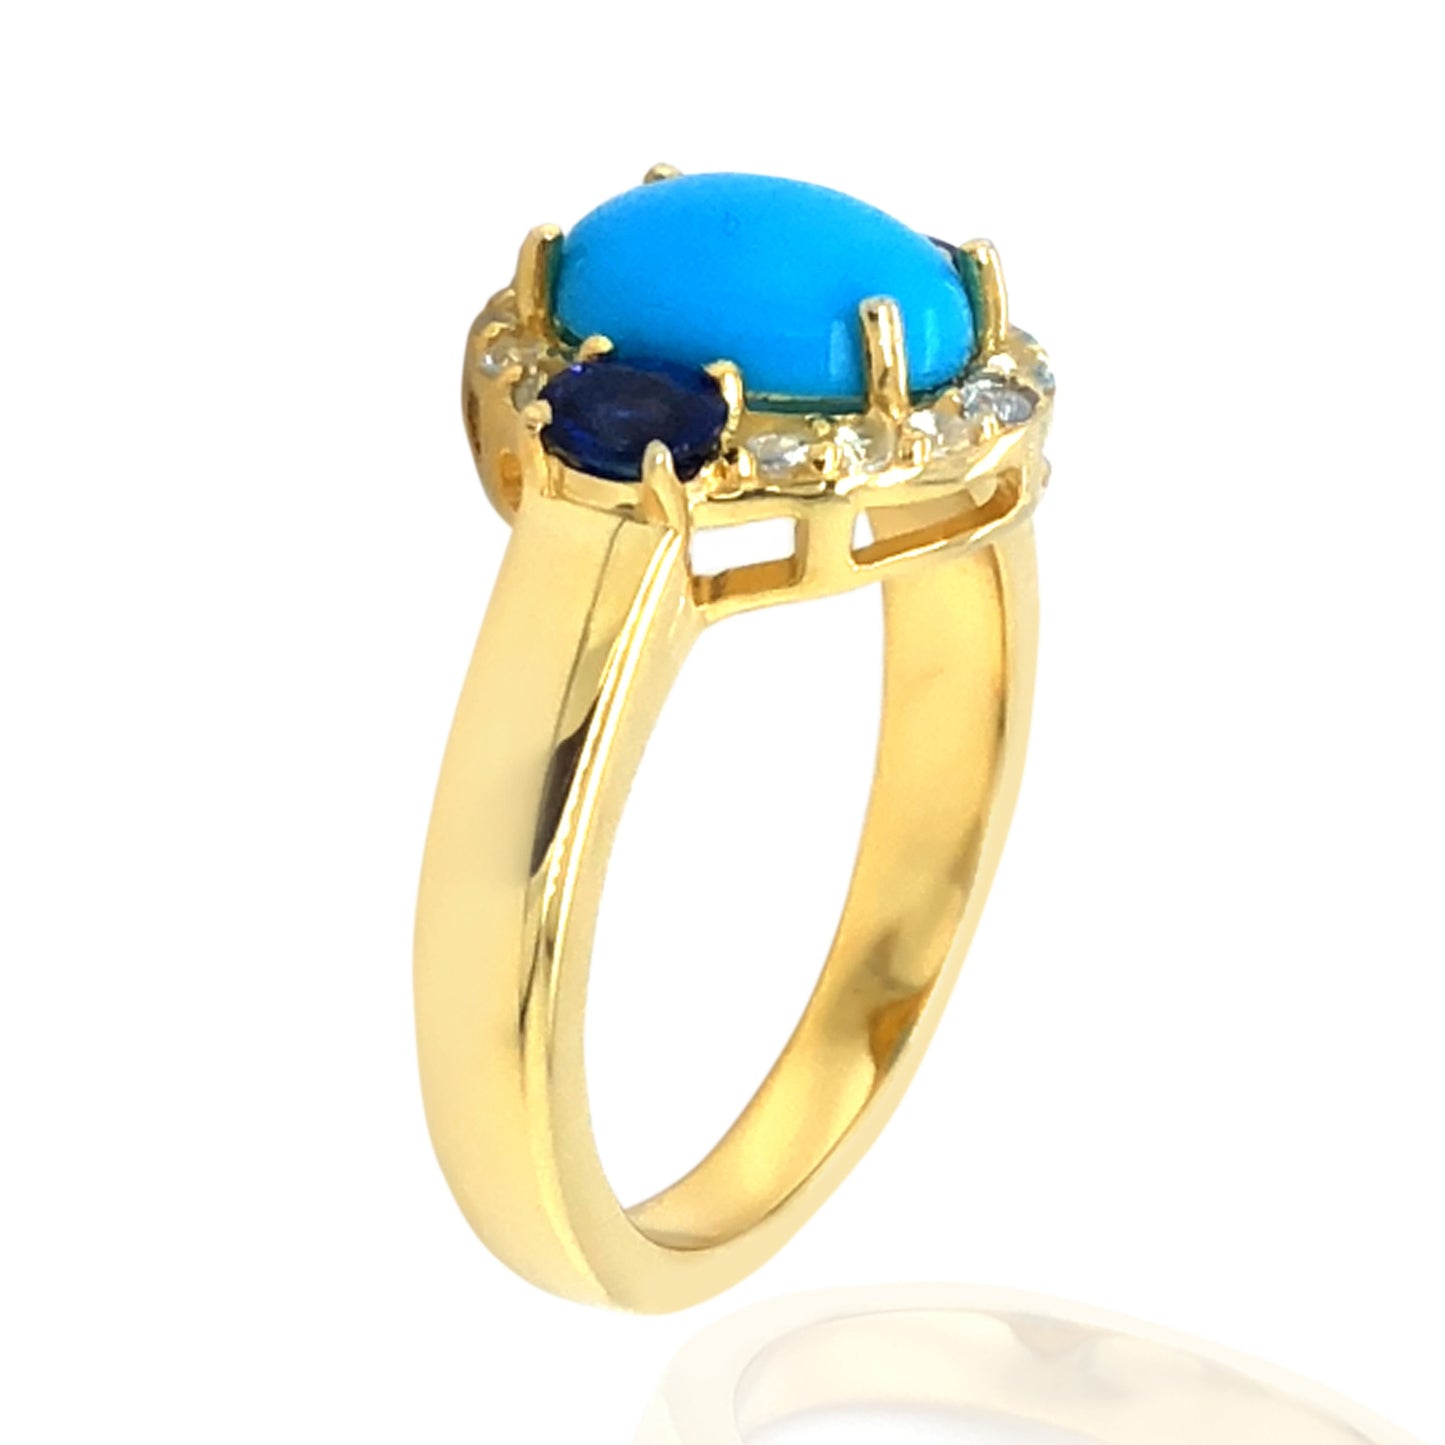 Natural Sleeping Beauty Turquoise Gemstone Silver Ring 925 Sterling Silver Gold Plated Ring Wedding Anniversary Gift